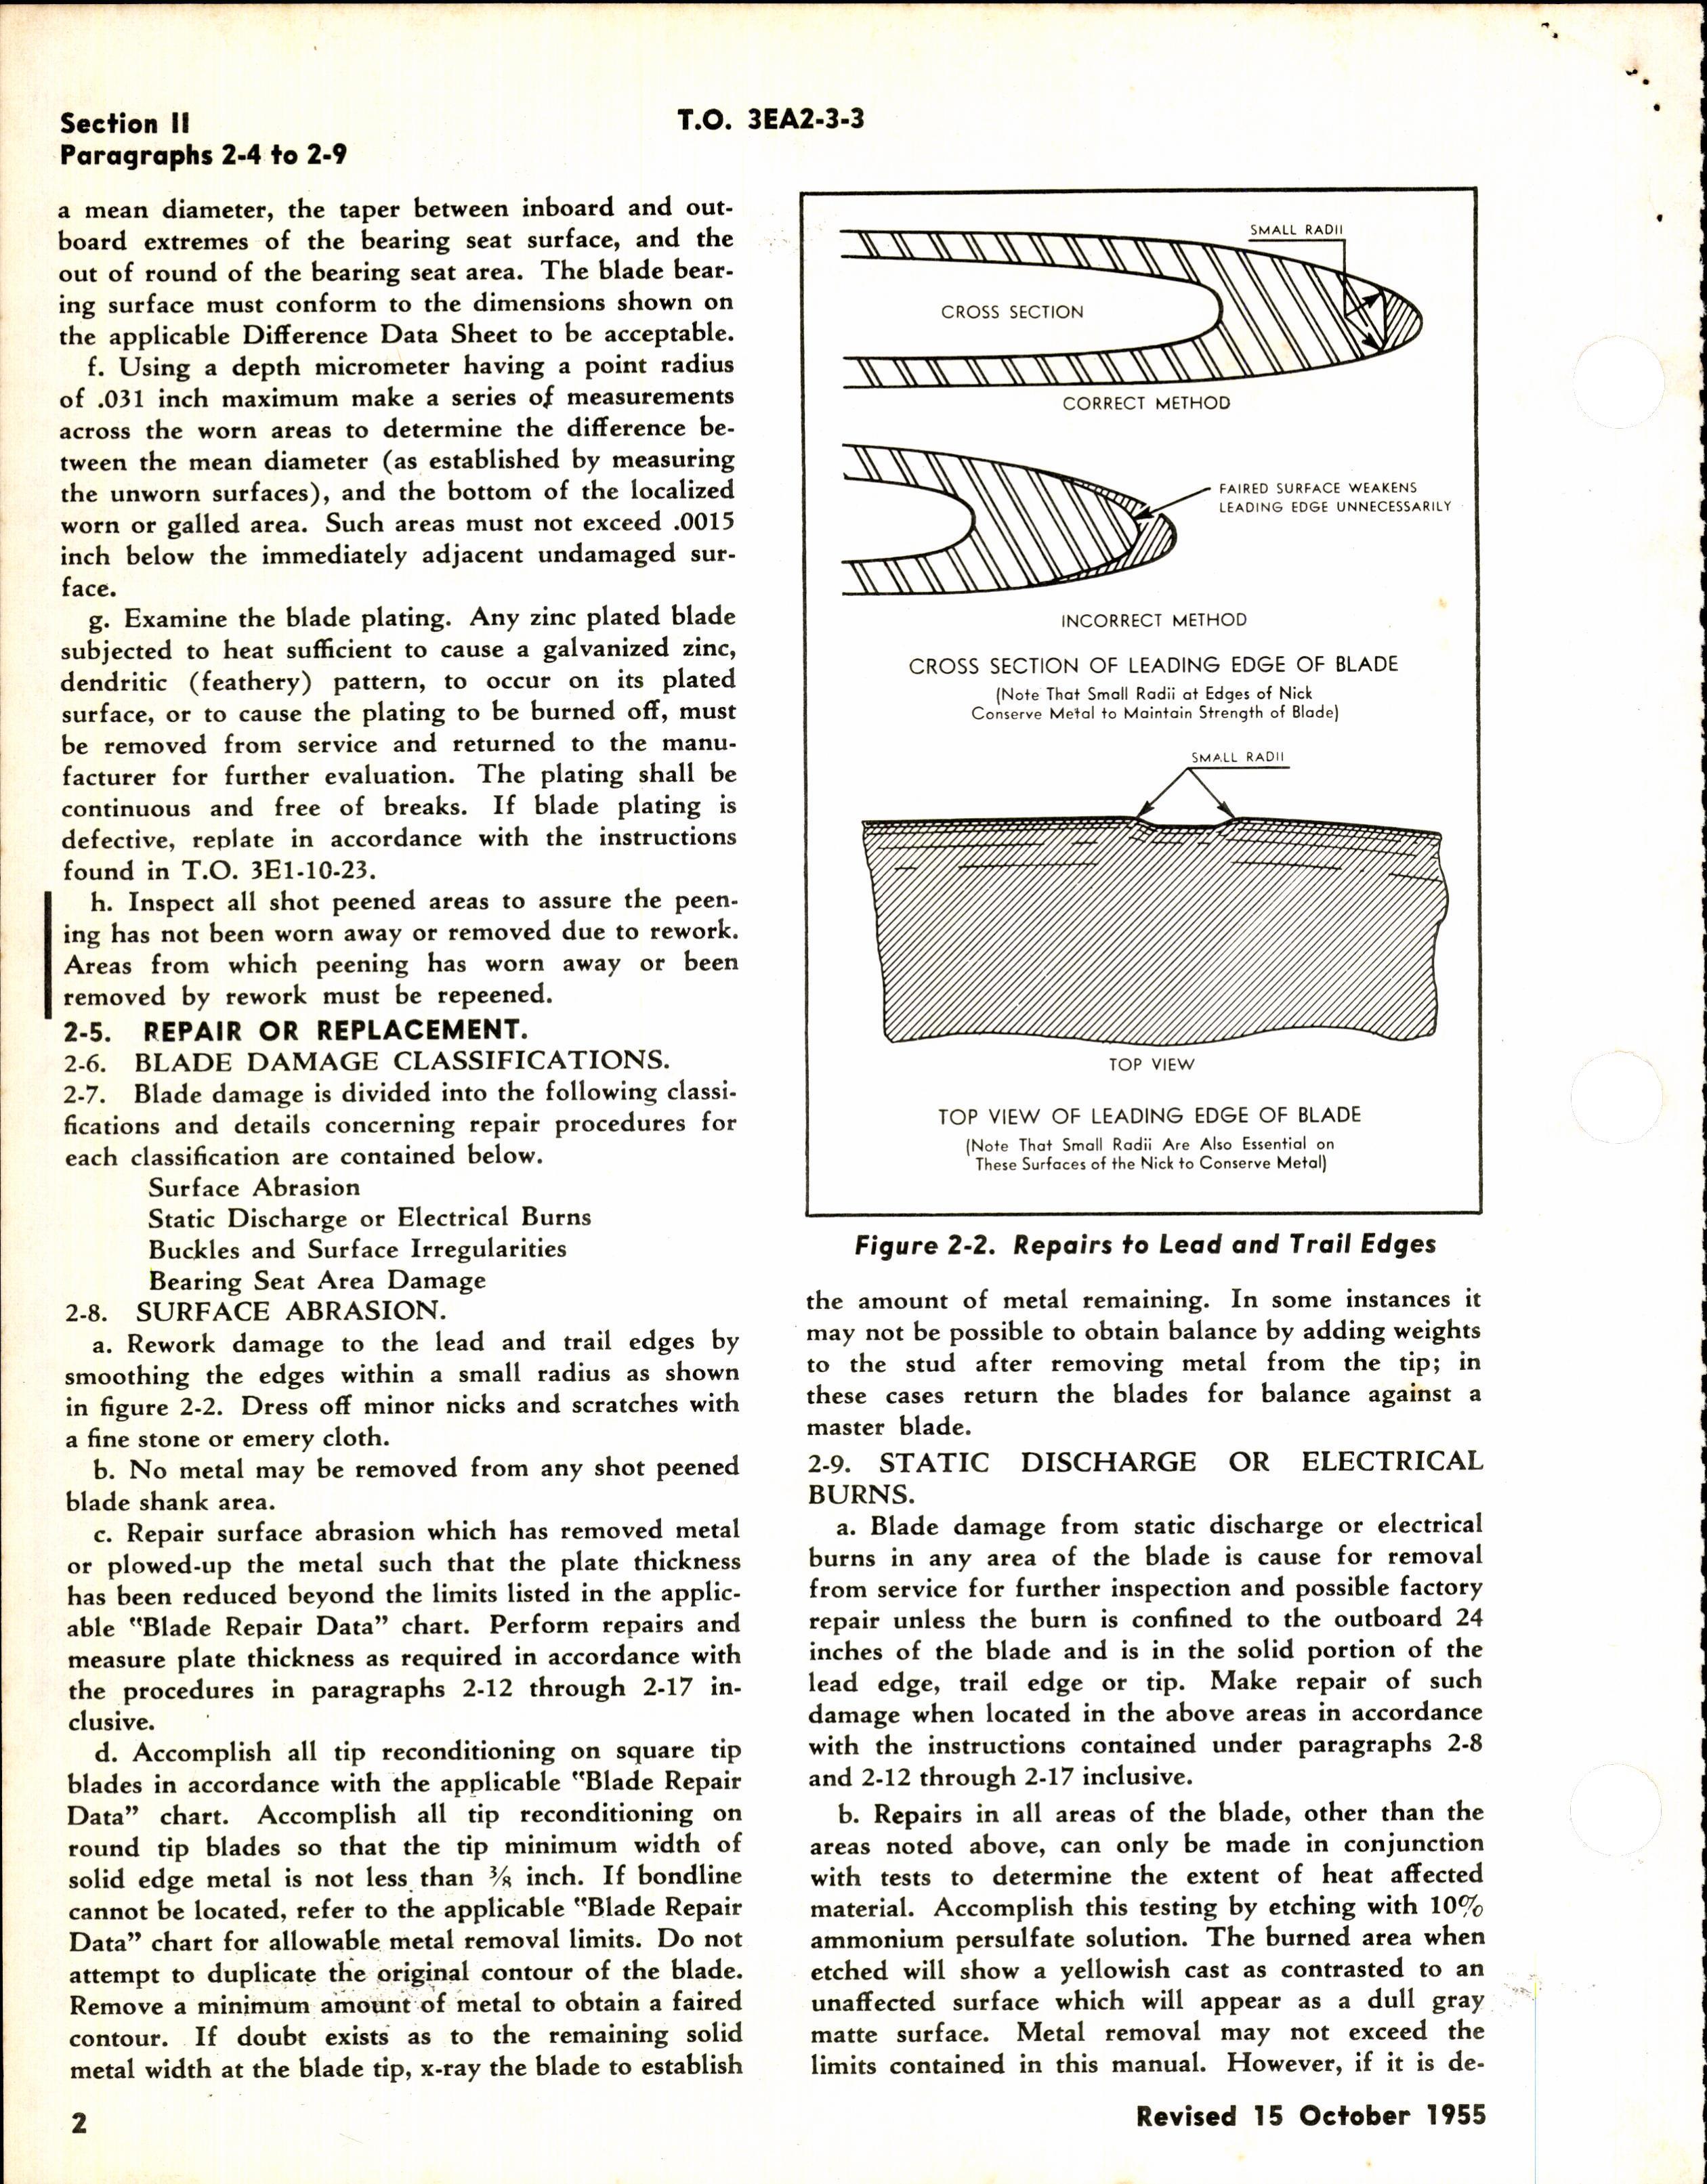 Sample page 4 from AirCorps Library document: Overhaul Instructions for Curtiss-Wright Blade Surface Repair